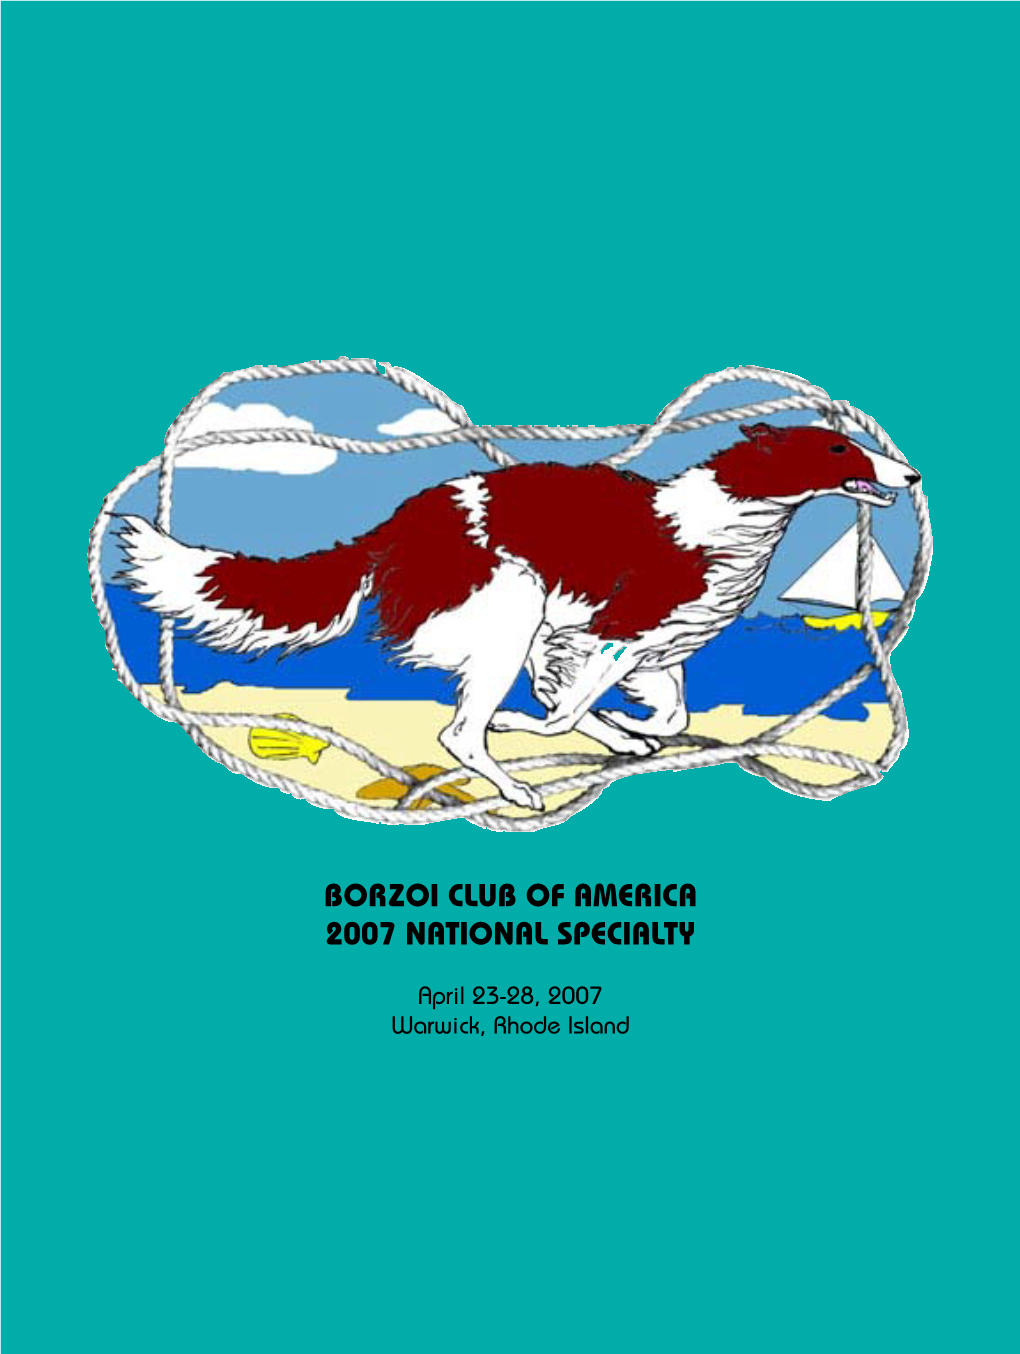 Borzoi Club of America 2007 National Specialty